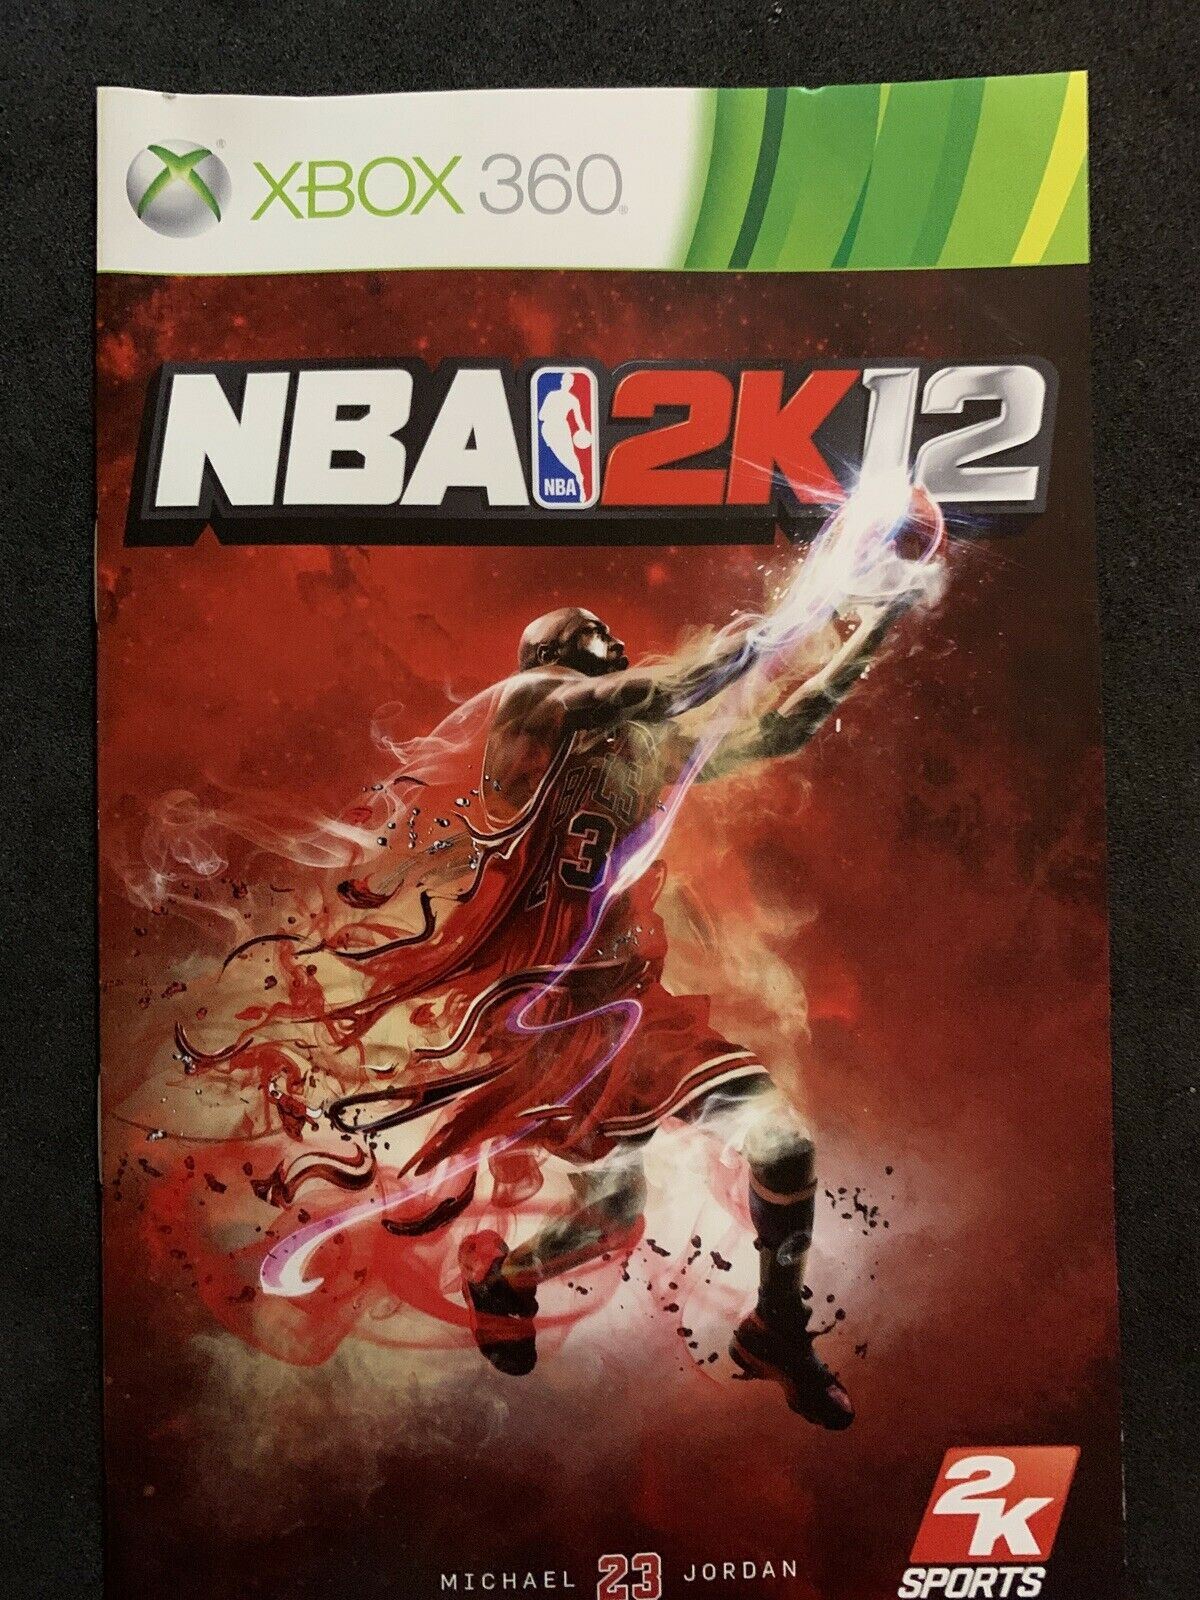 NBA 2K12 Game for Xbox 360